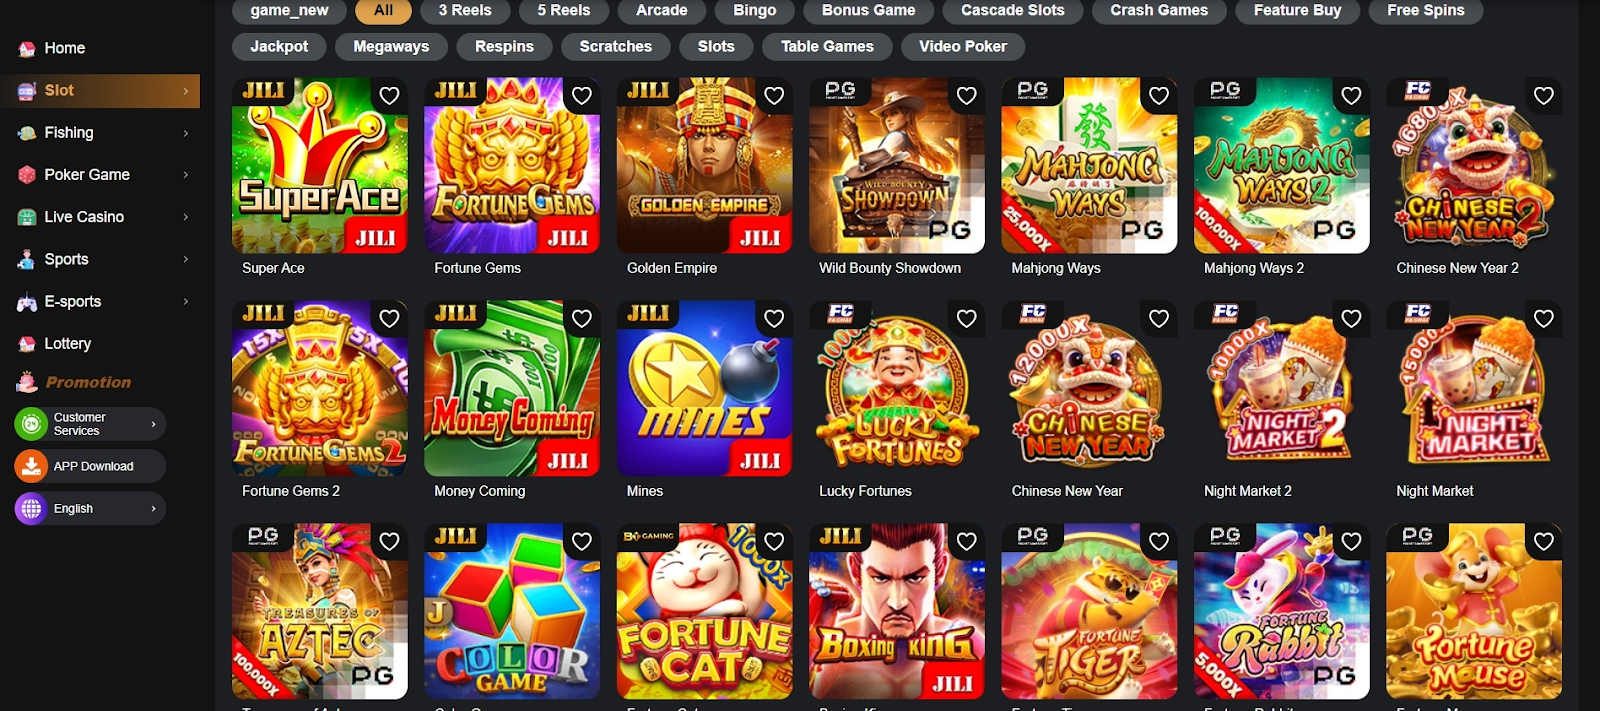 Top Games and Providers Slots